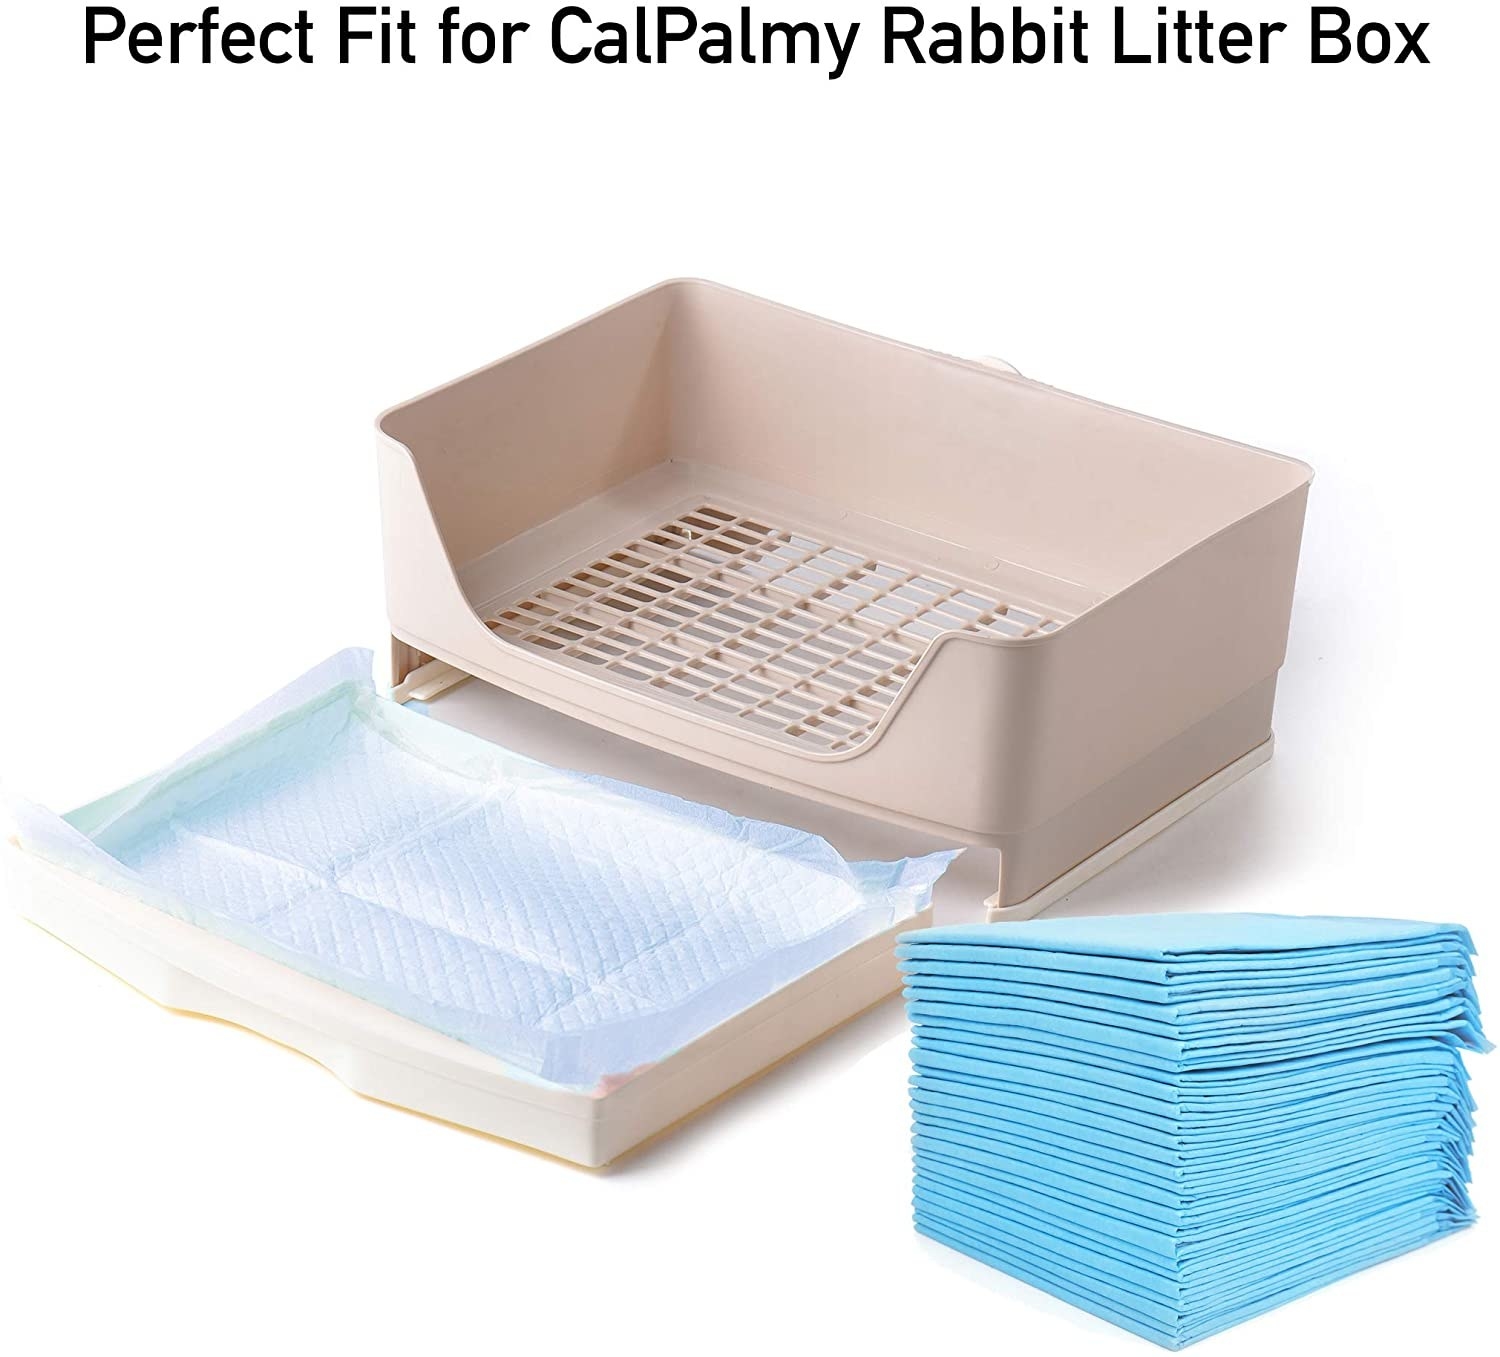 The potty pads stacked and stretched out on a rabbit litter box to show their size